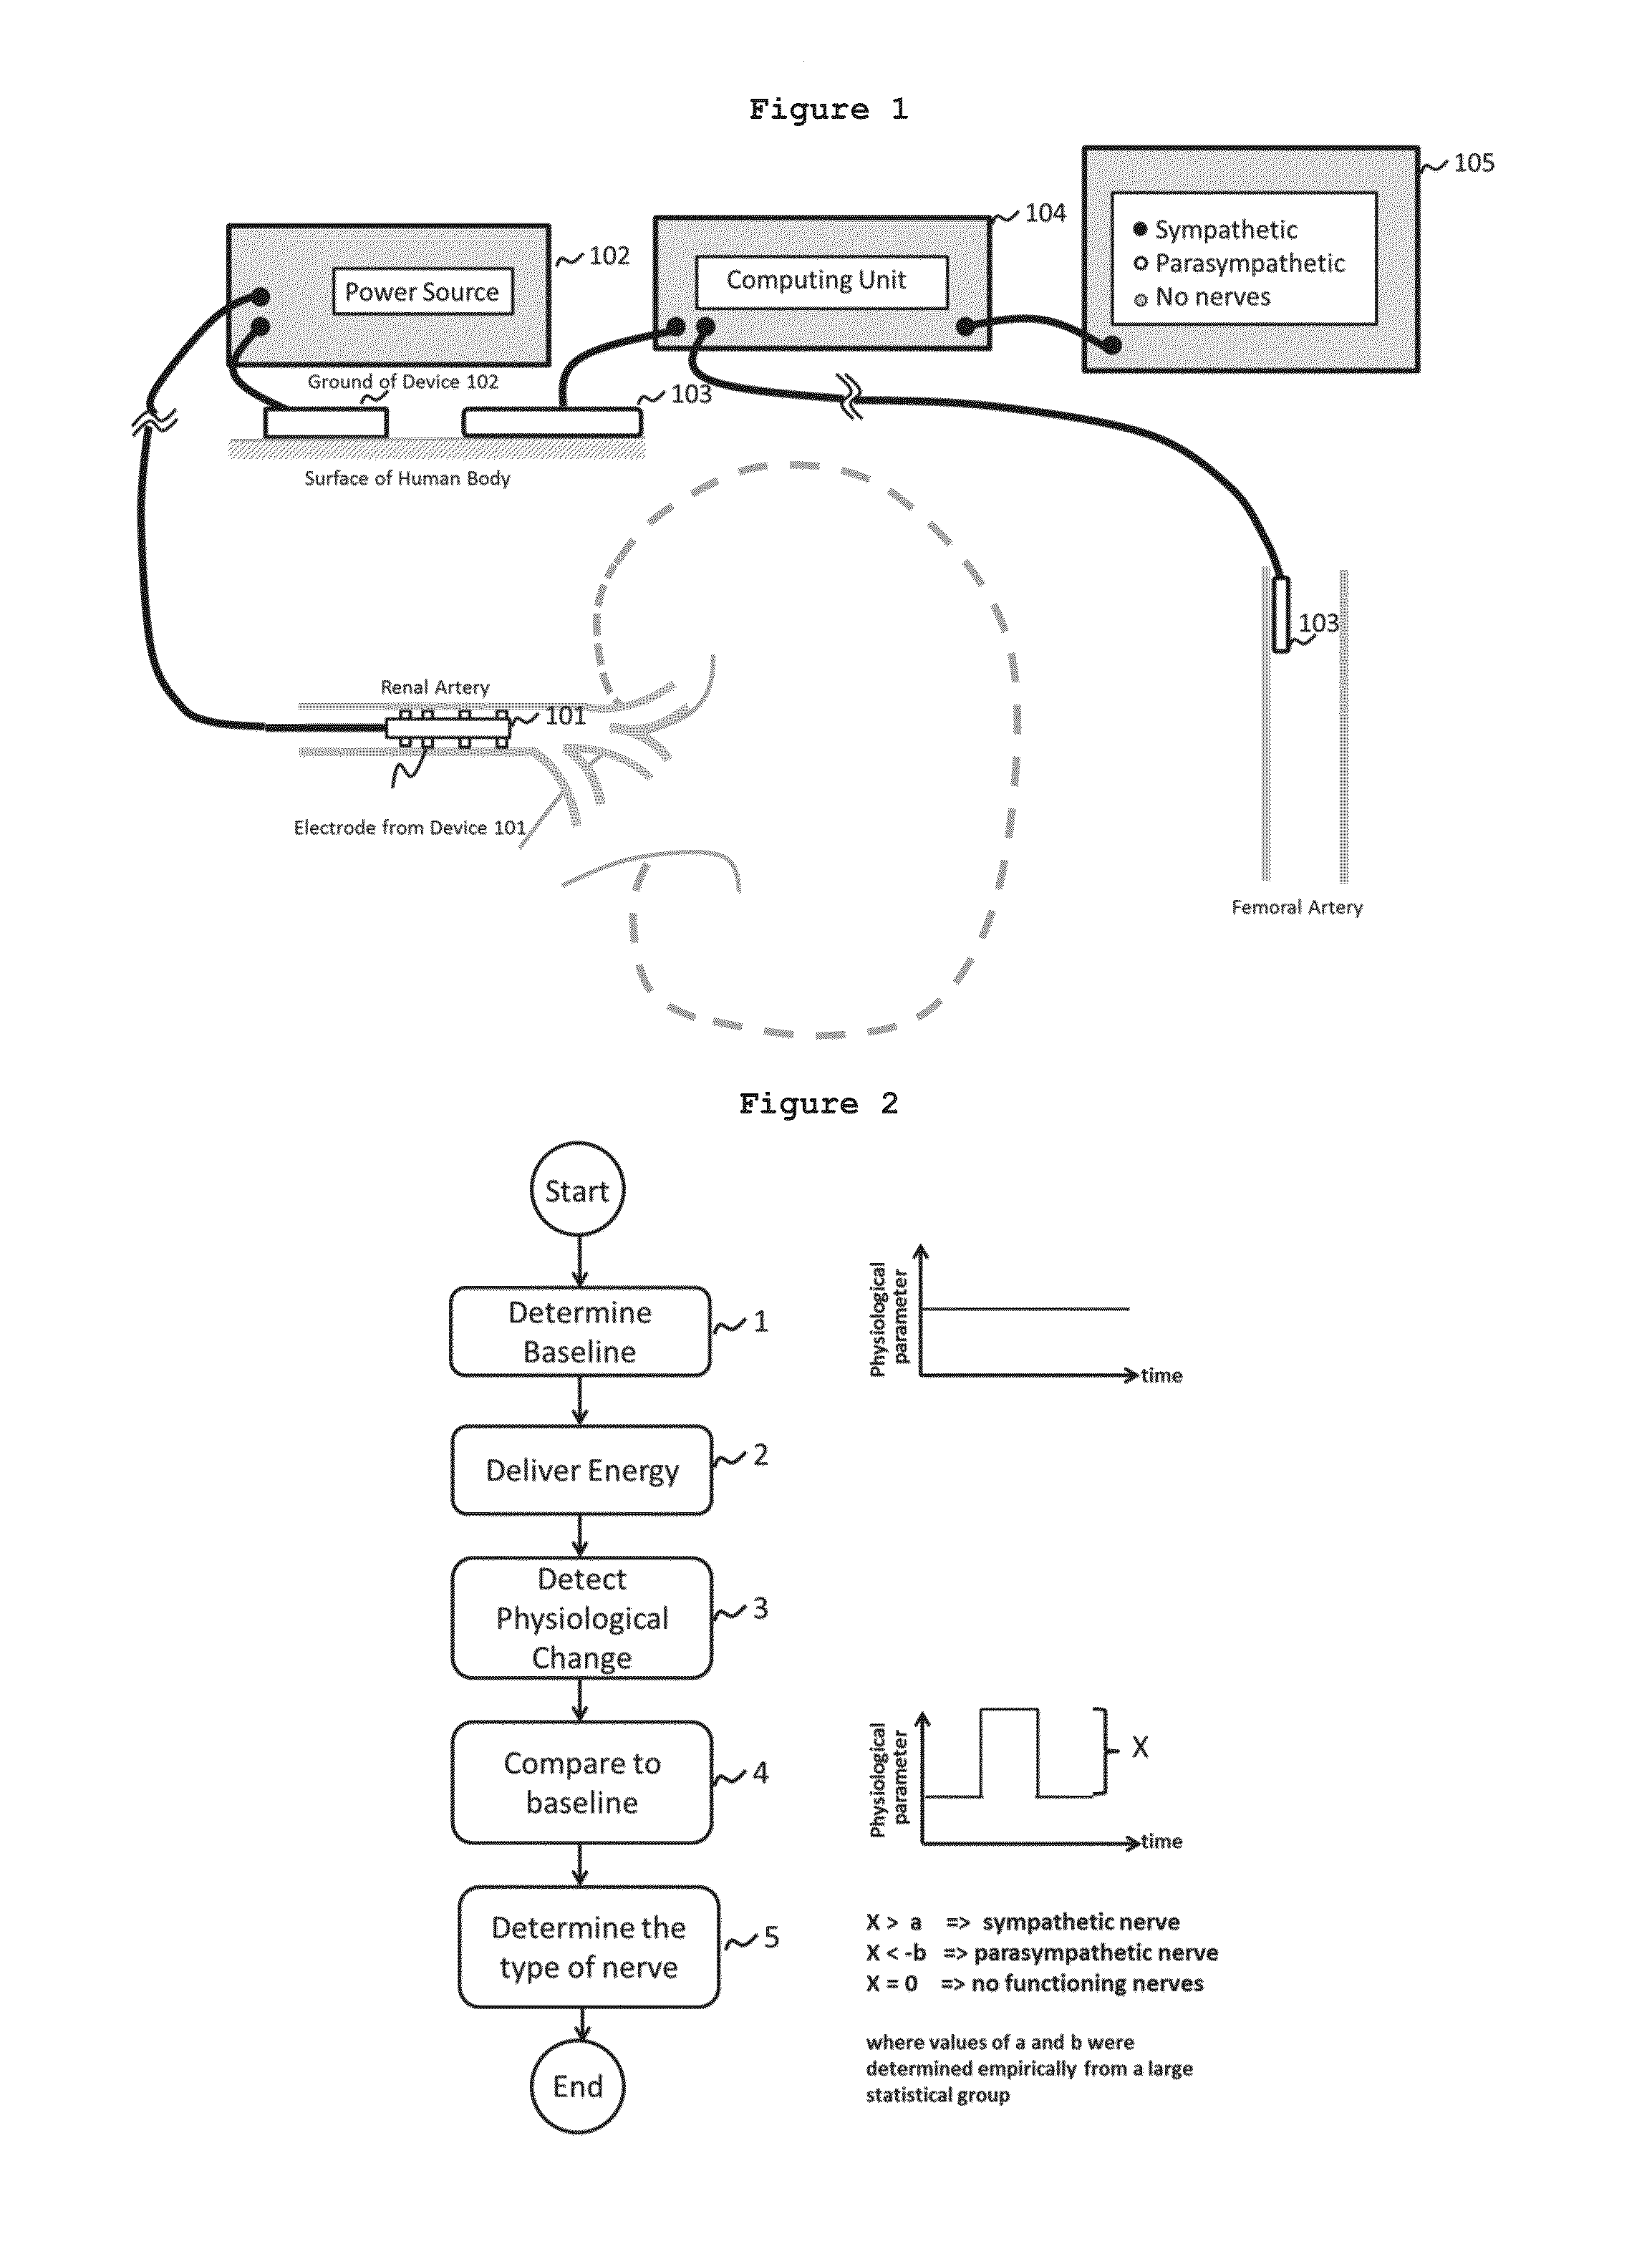 System and method for mapping the functional nerves innervating the wall of arteries, 3-d mapping and catheters for same